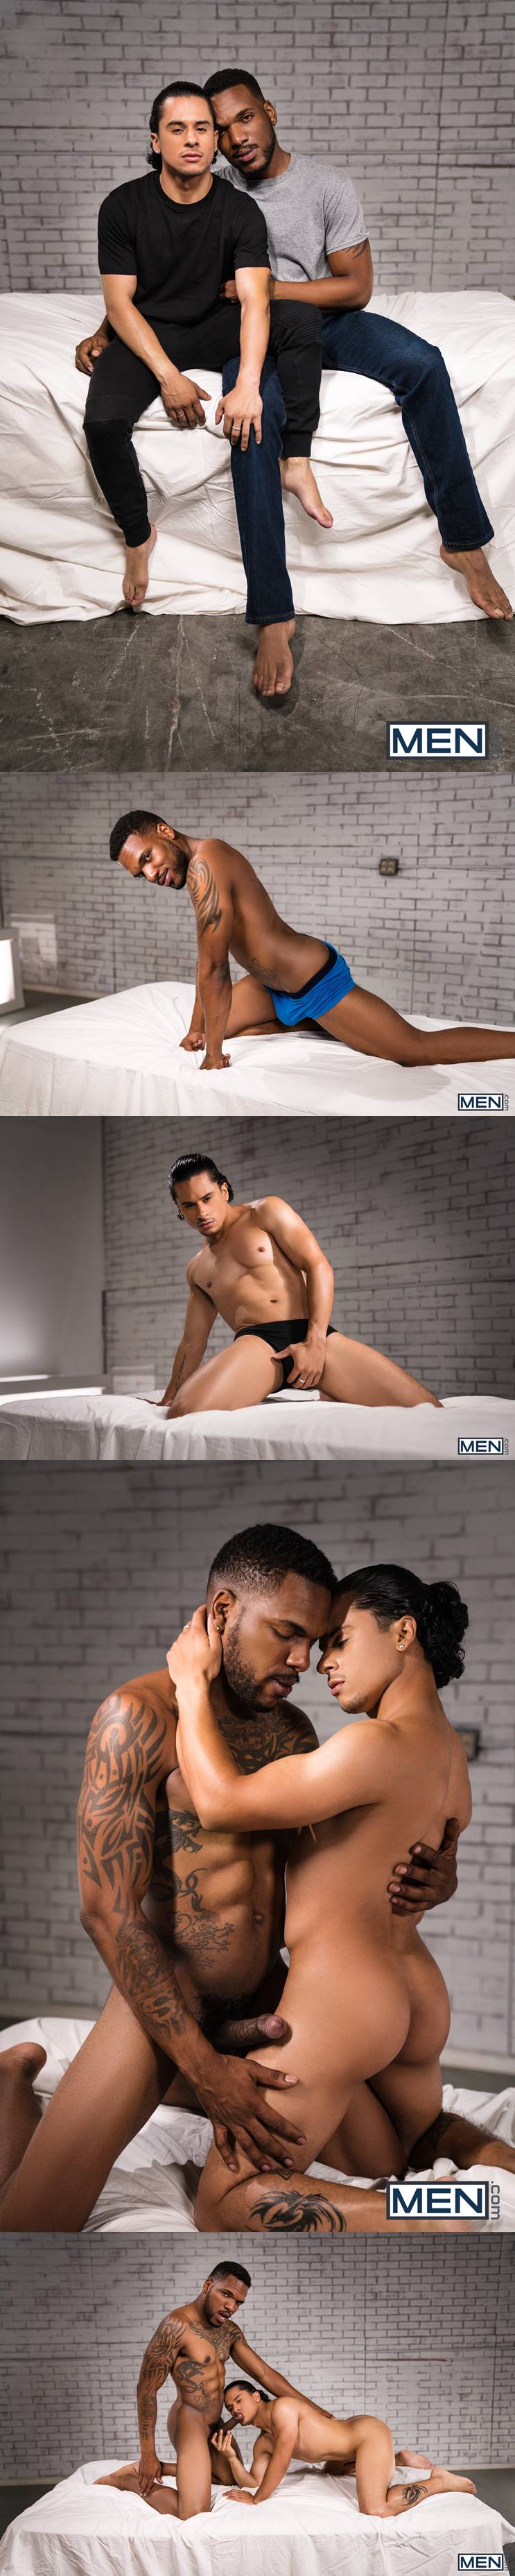 Room Of Desire: Armond Rizzo and Aaron Reese